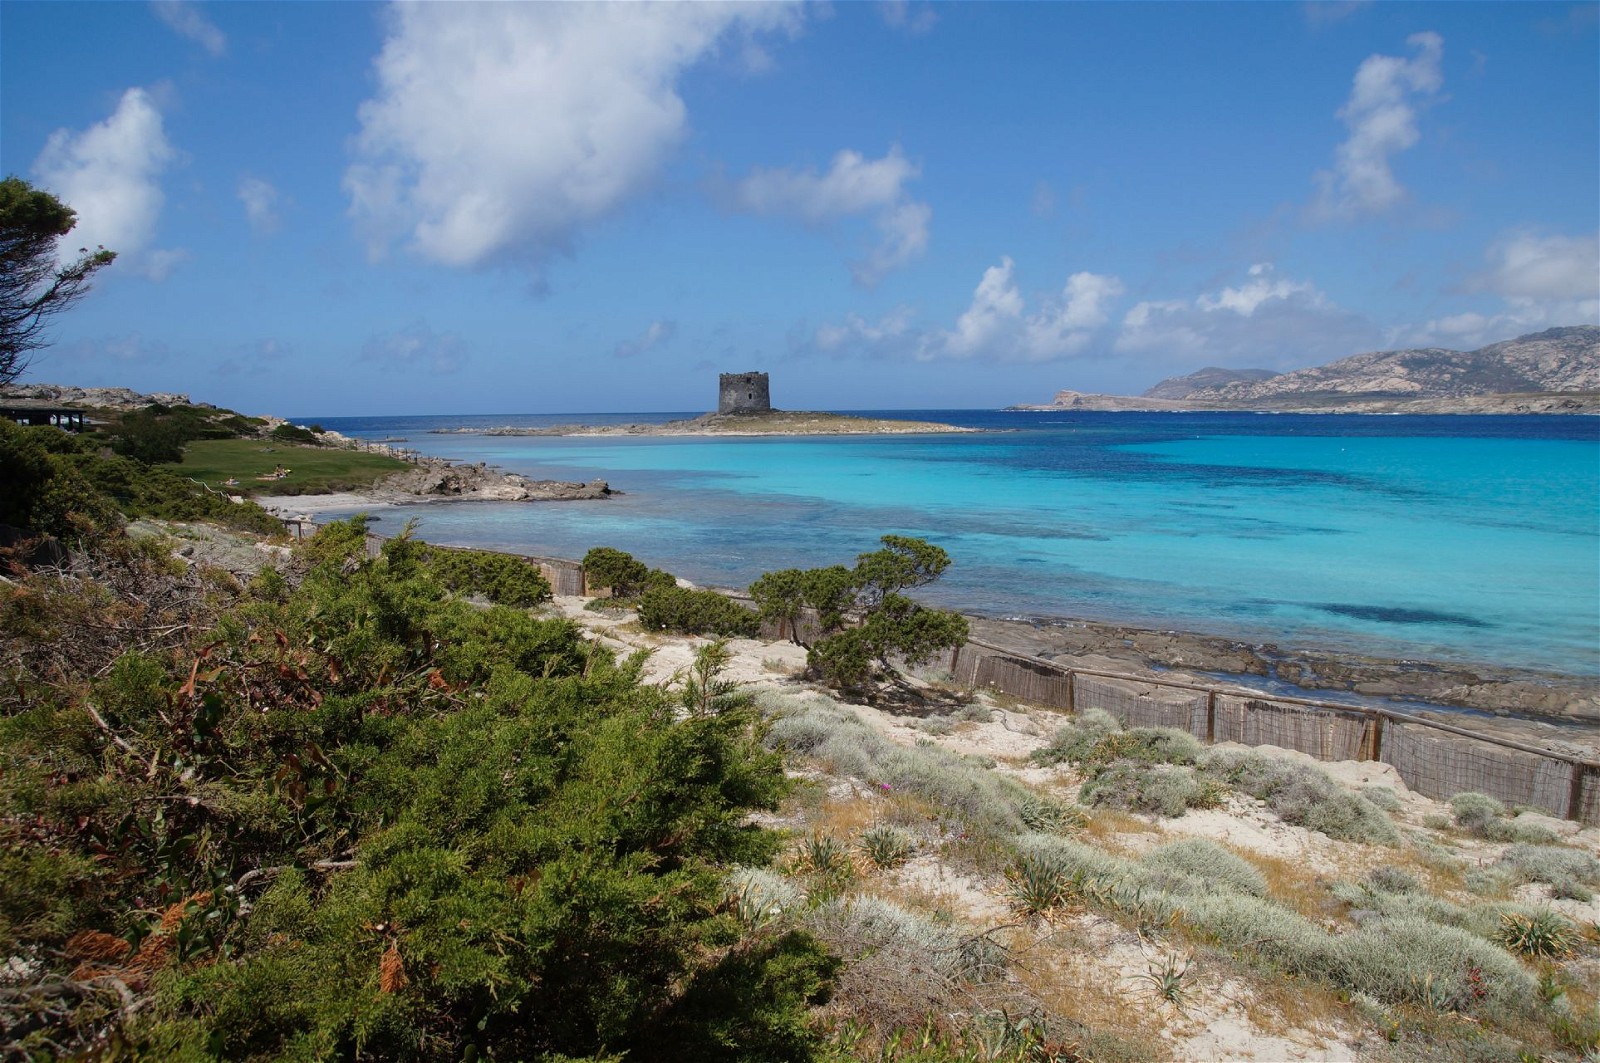 La Pelosa Beach: Located in the town of Stintino, La Pelosa Beach is one of Sardinia's iconic beaches. It is characterized by its fine white sand, crystal-clear waters, and stunning views, including a historic Aragonese tower.